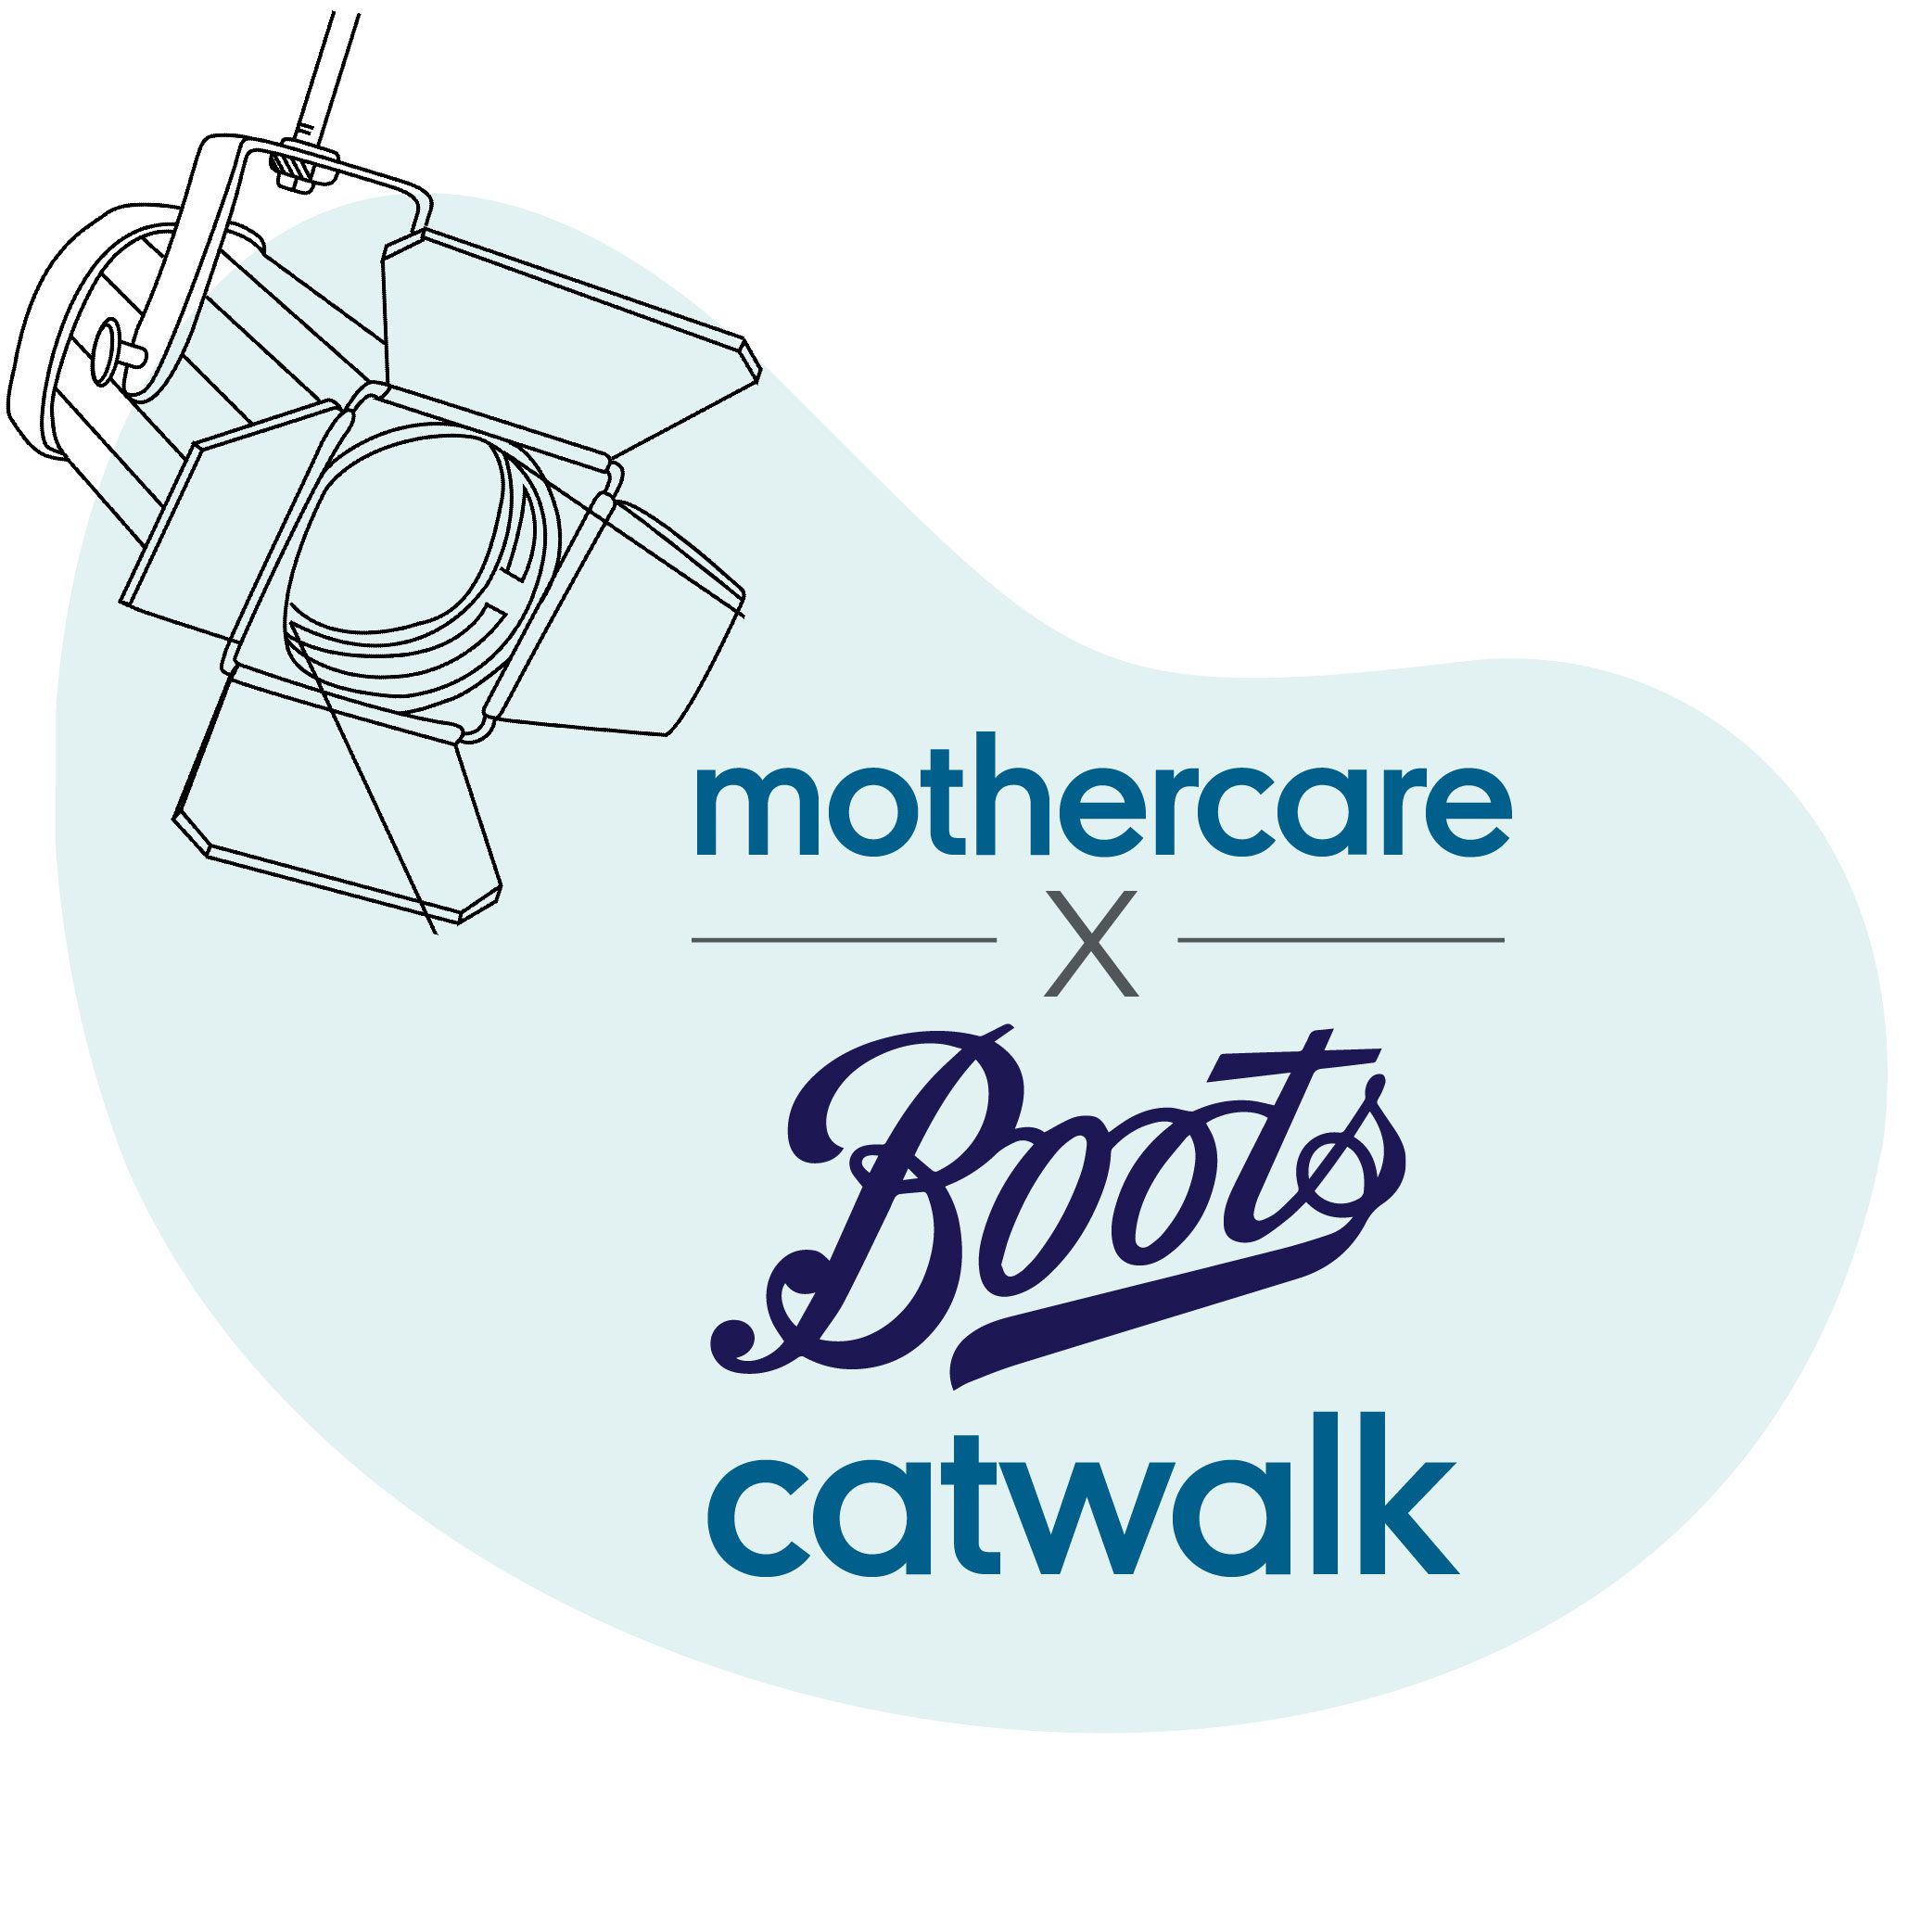 Mothercare x Boots Catwalk